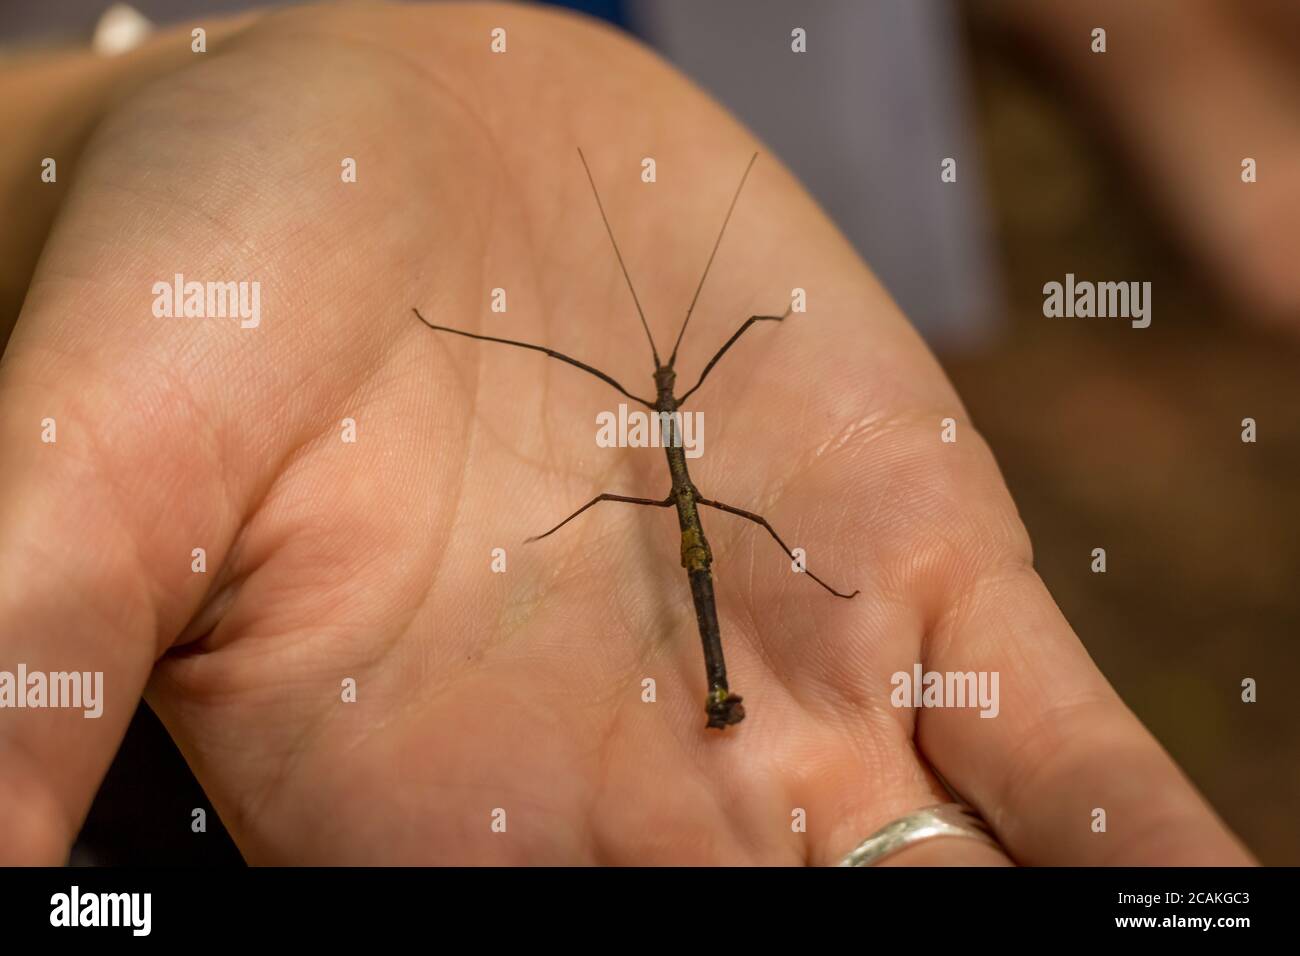 A small stick insect in a persons hand from a rainforest, Malaysia Stock Photo